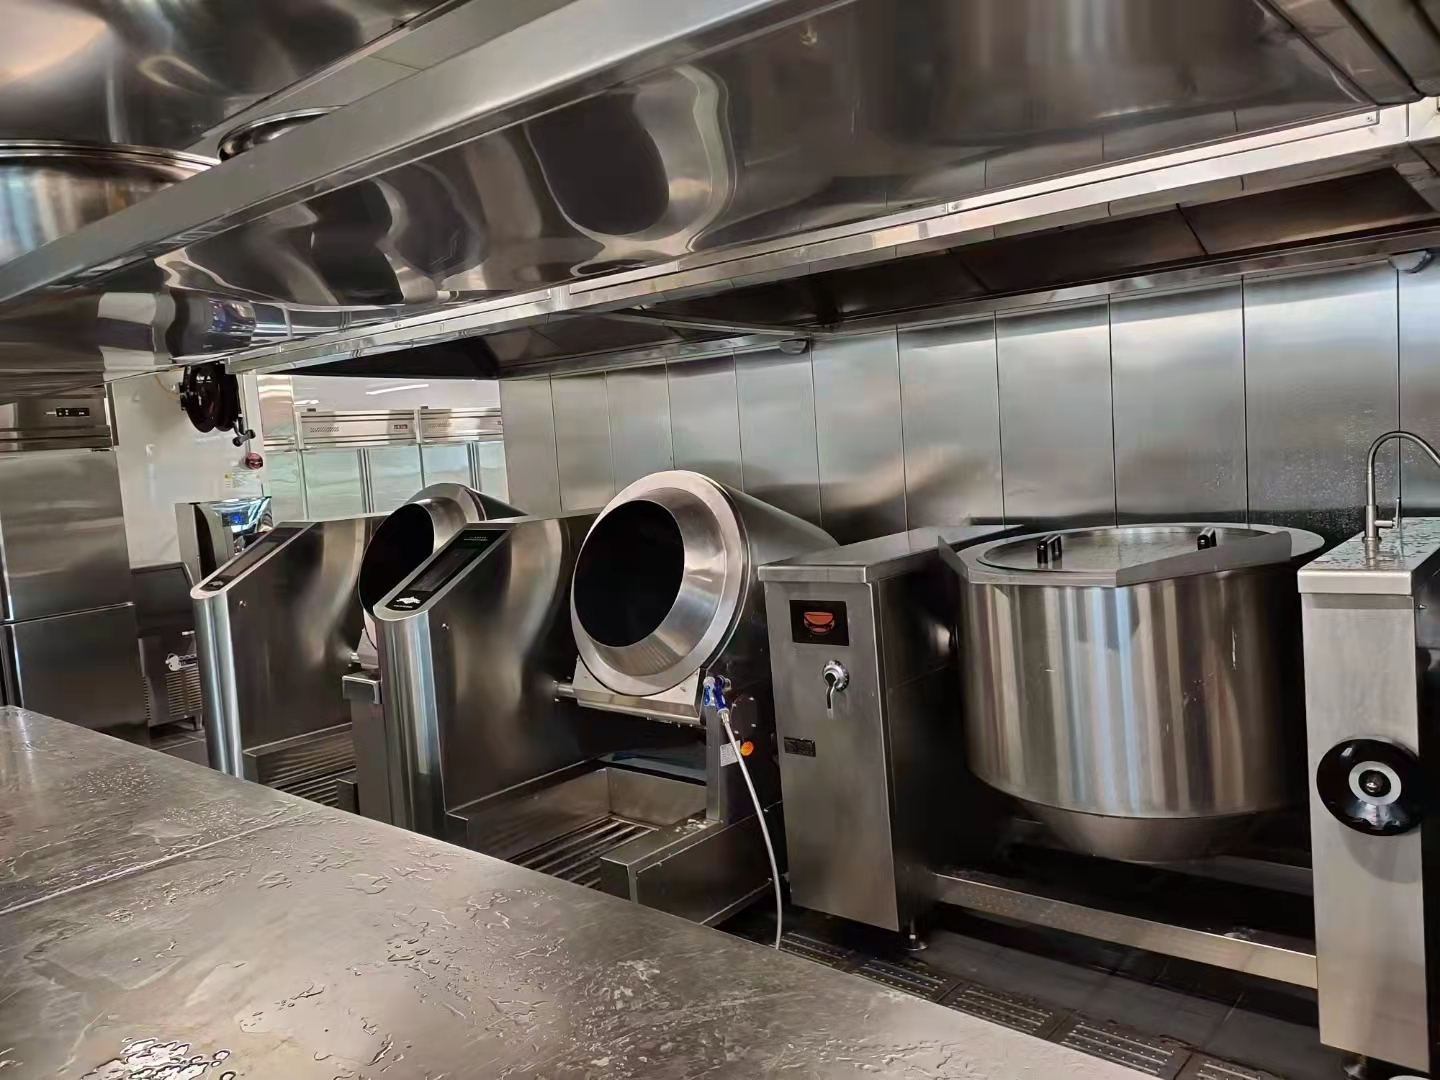 The application of Lestov automatic cooking machines